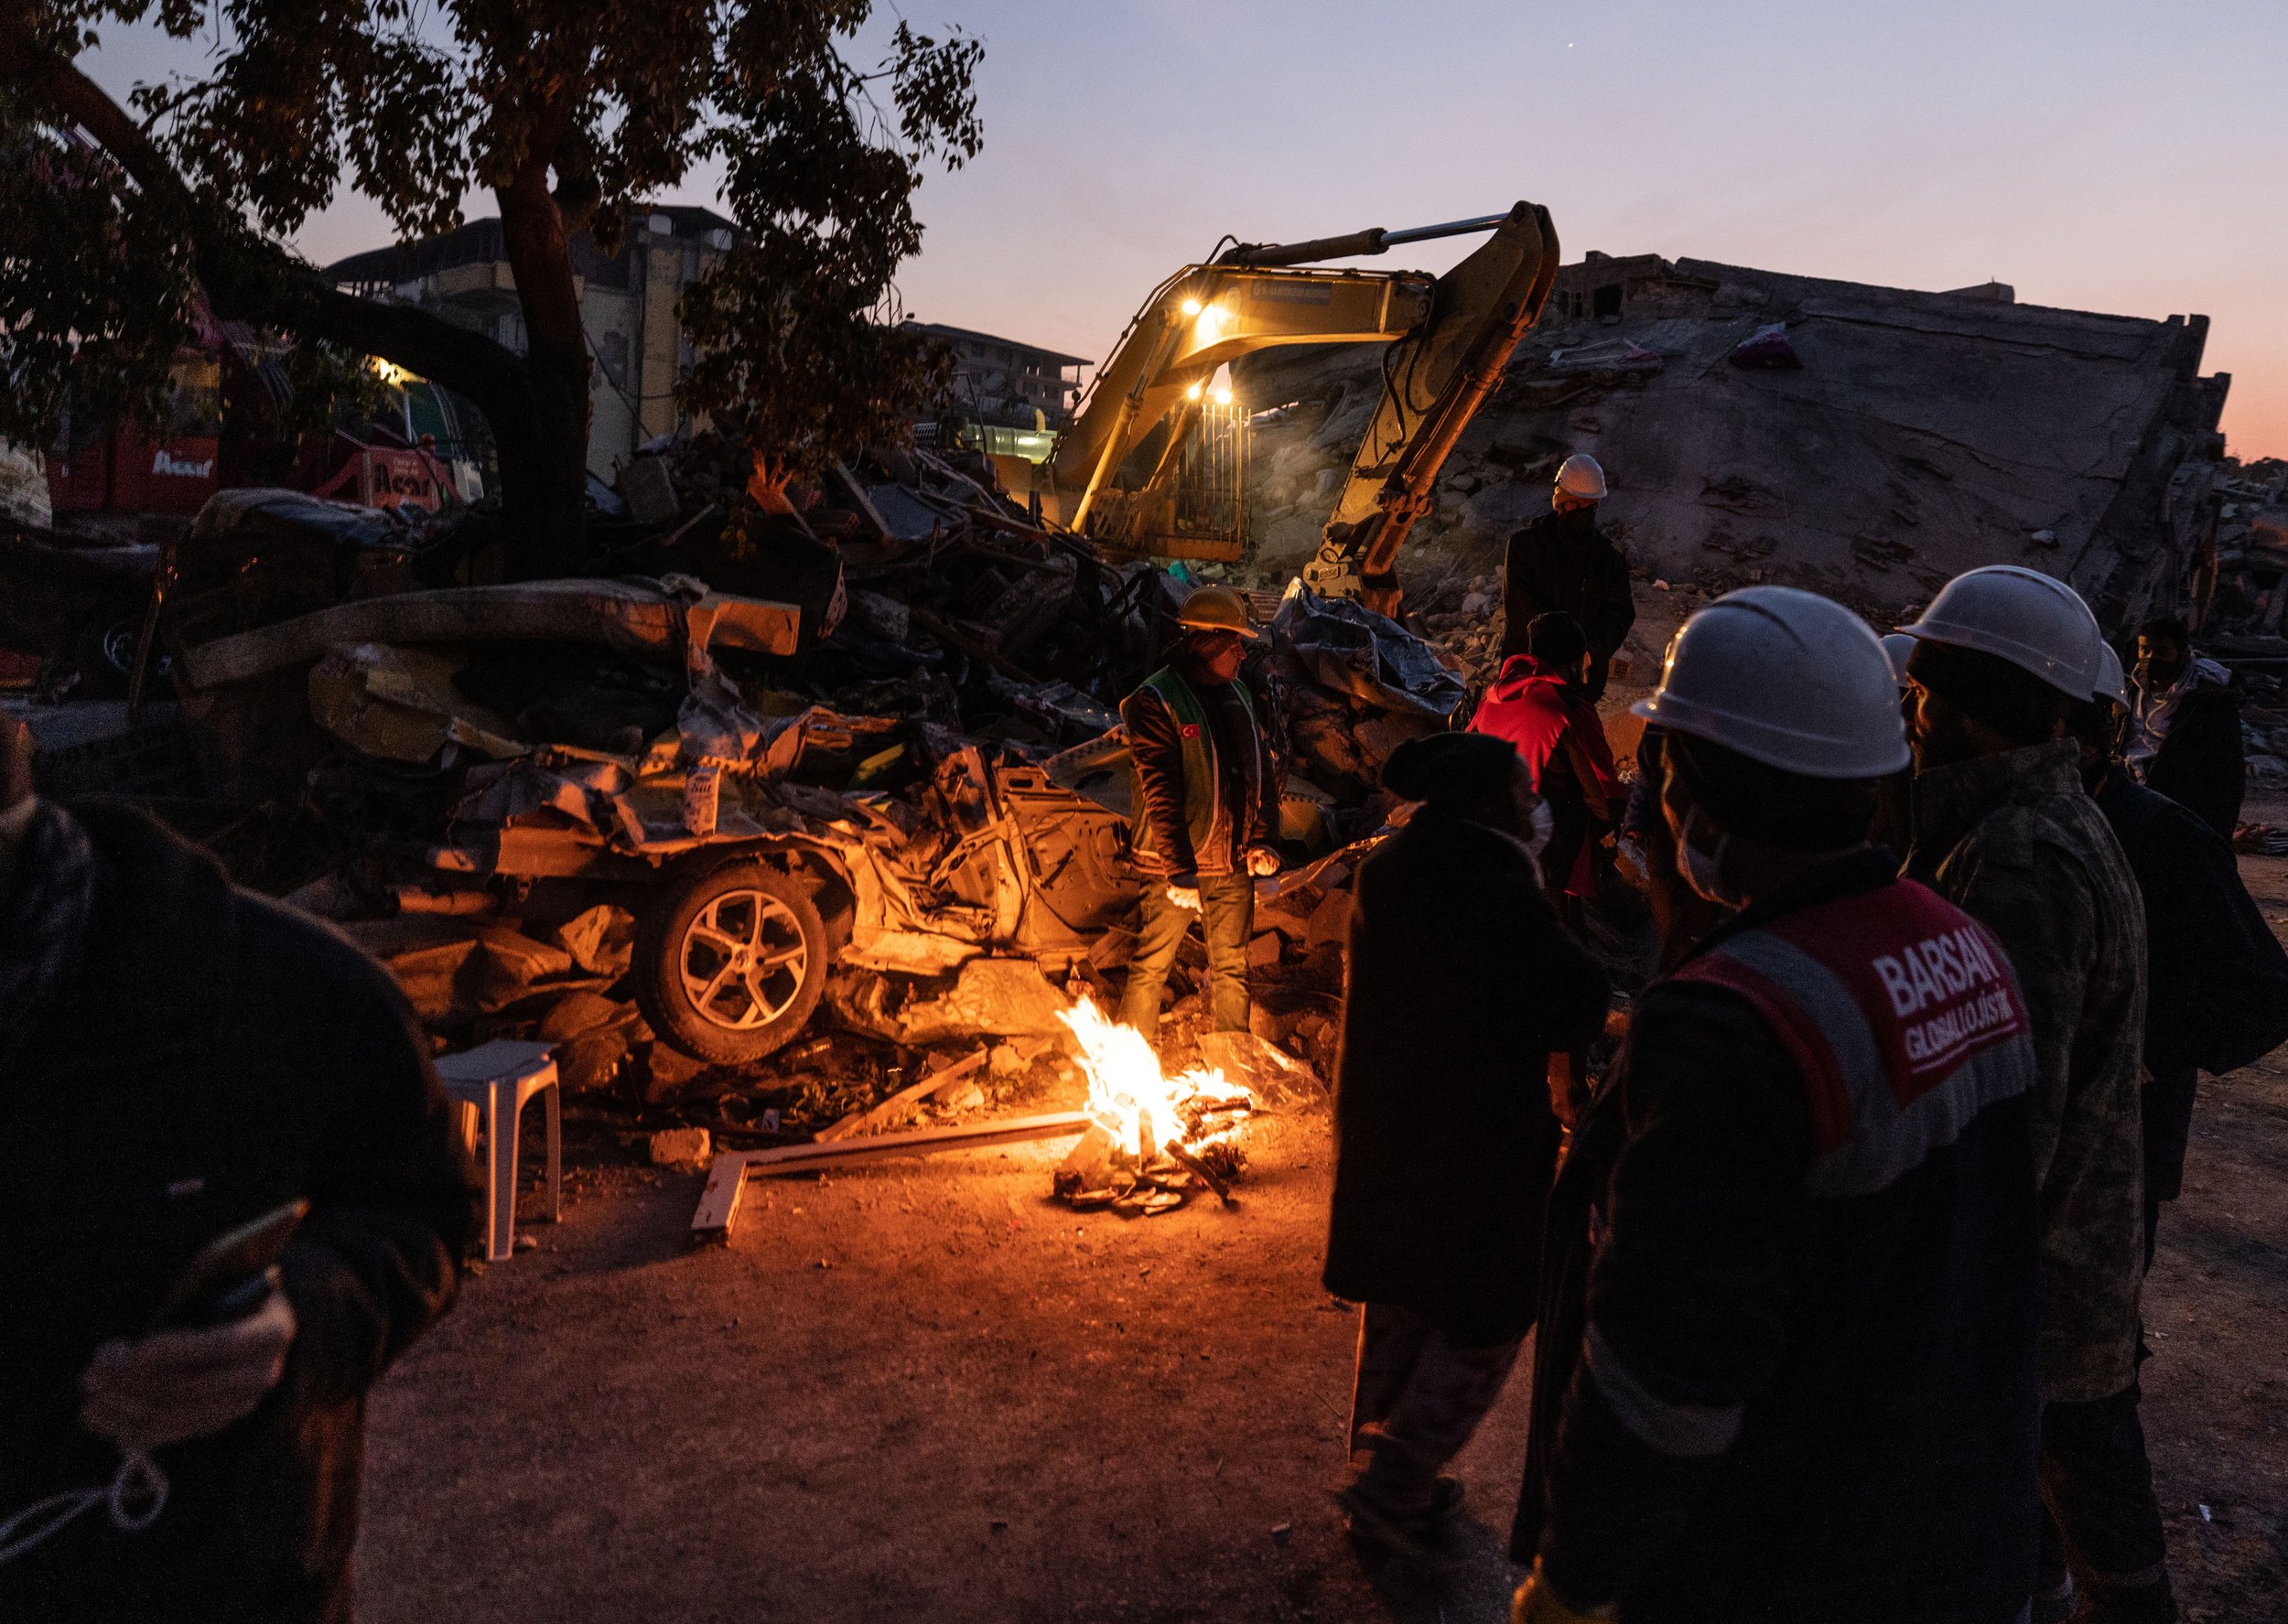  Man-made fires keep rescue workers in Hatay, Turkey warm as they continue to search for bodies through the night.  